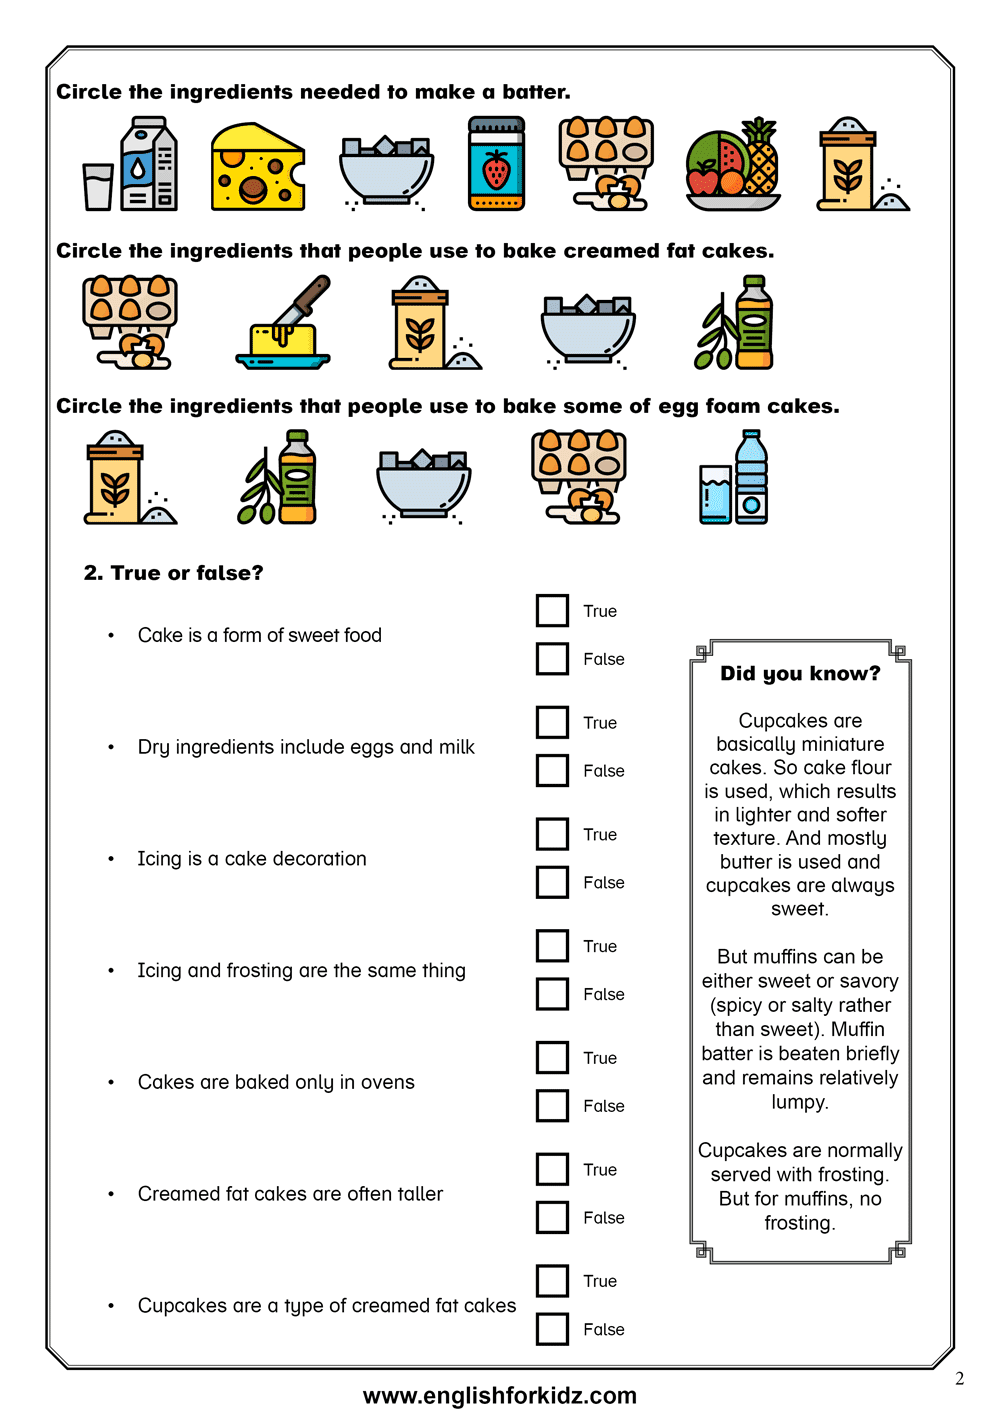 Reading Comprehension Worksheets Food And Cooking